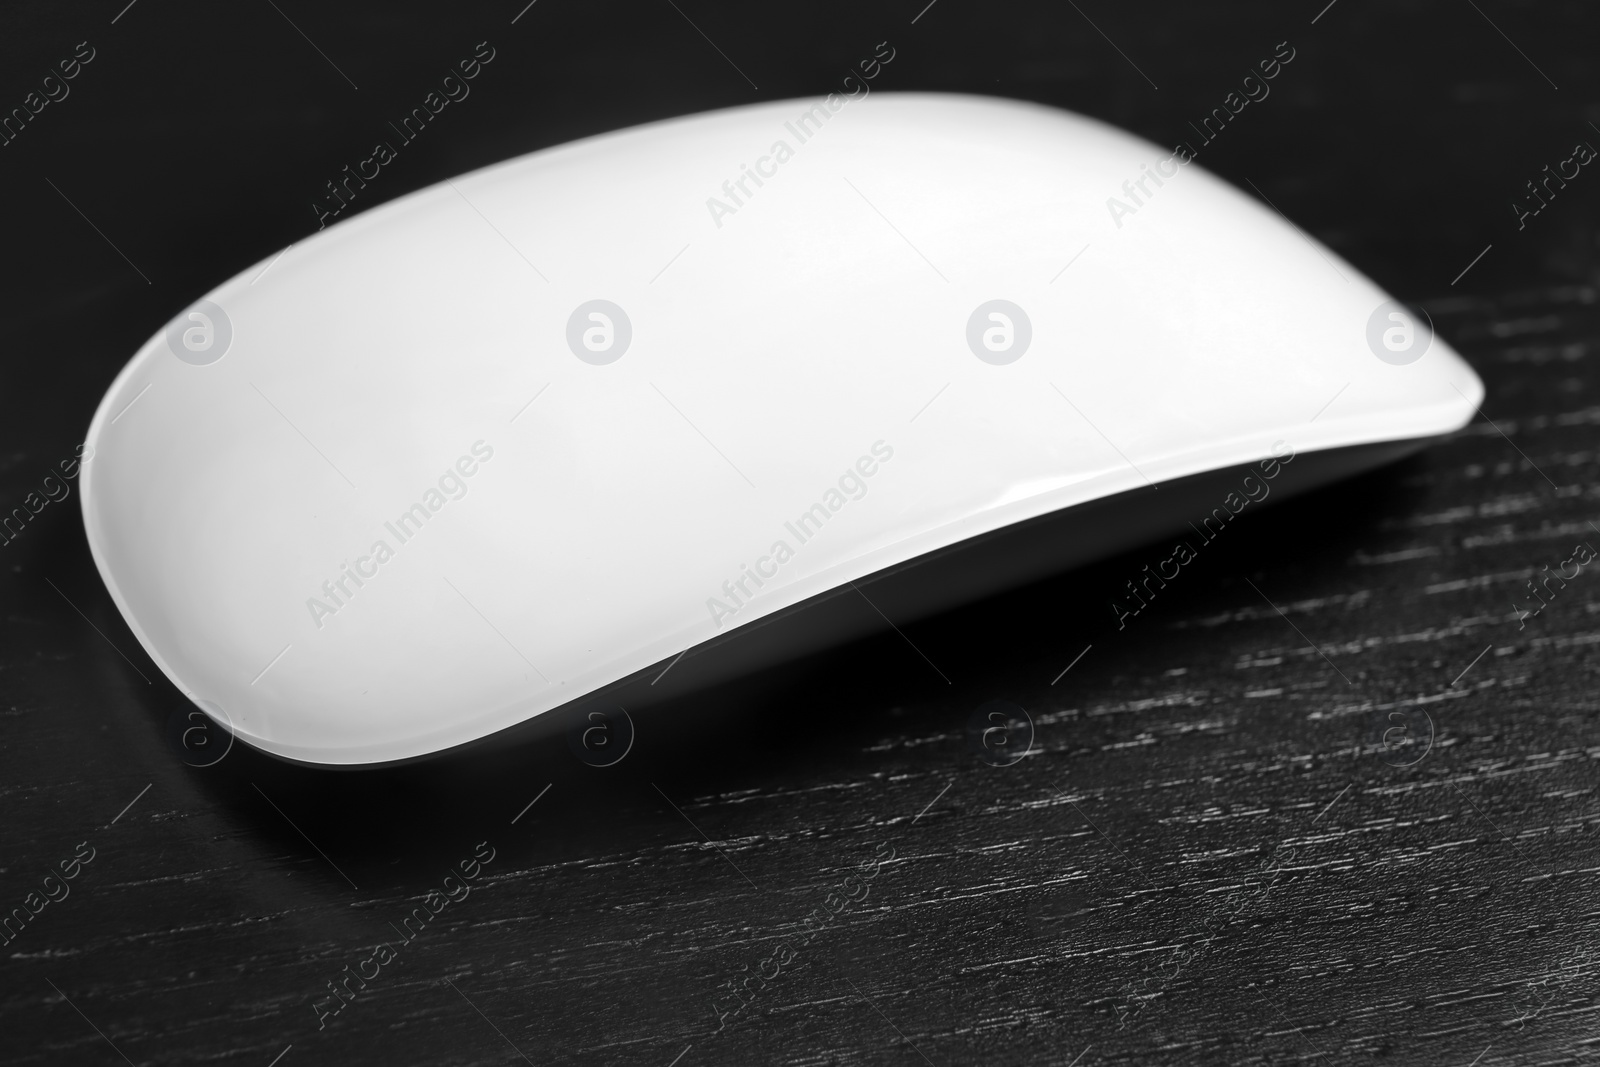 Photo of Wireless computer mouse on black background